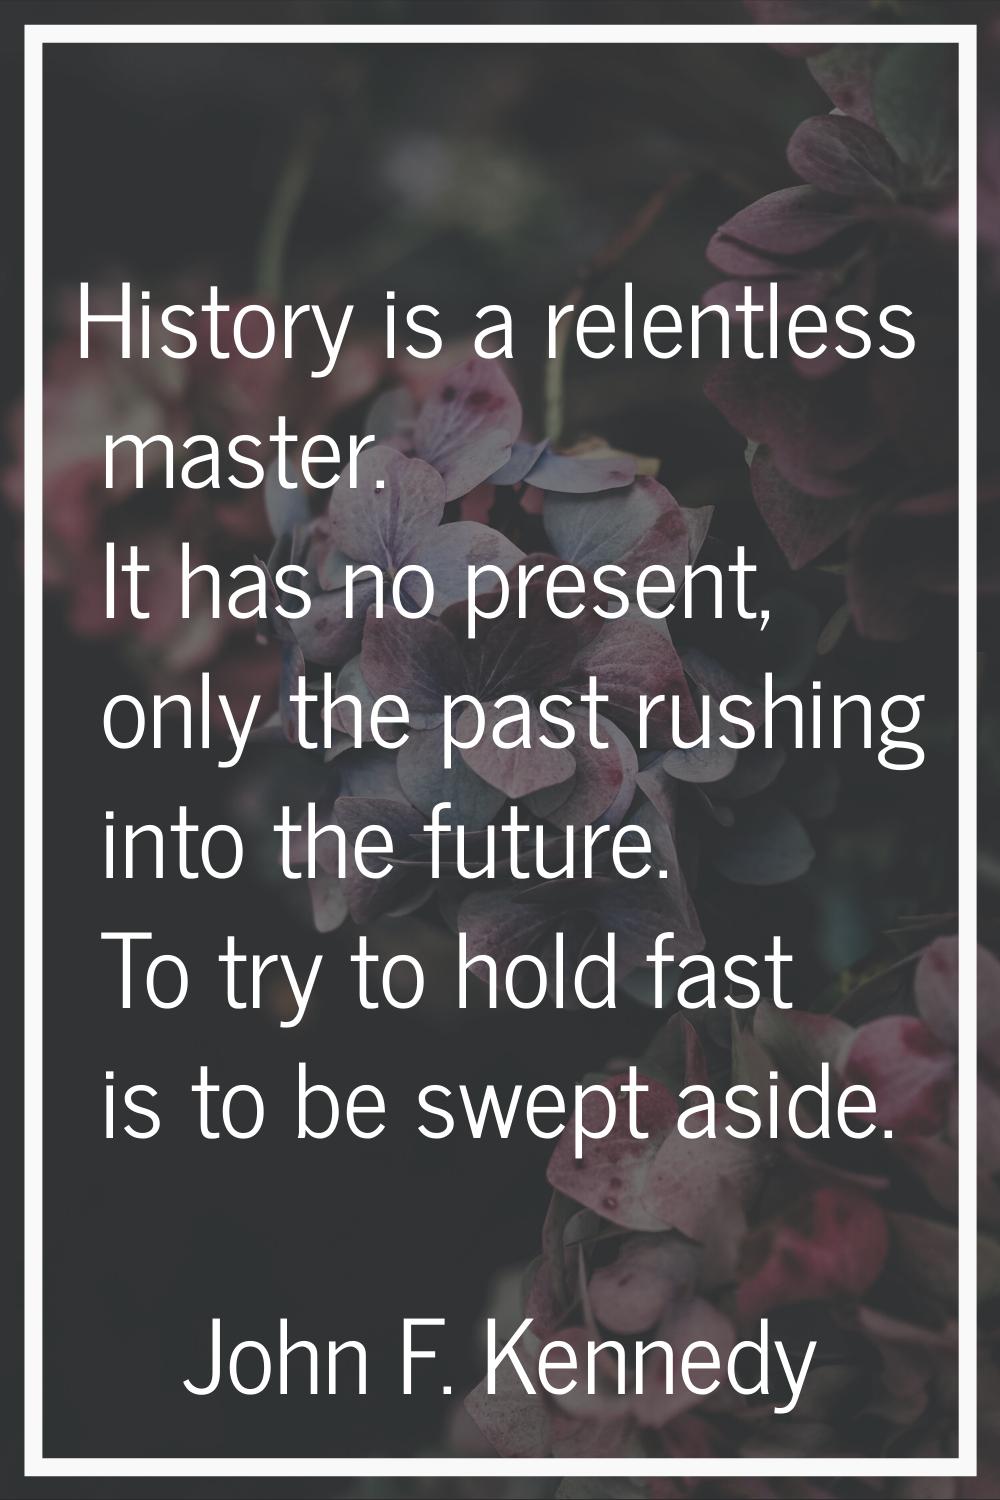 History is a relentless master. It has no present, only the past rushing into the future. To try to